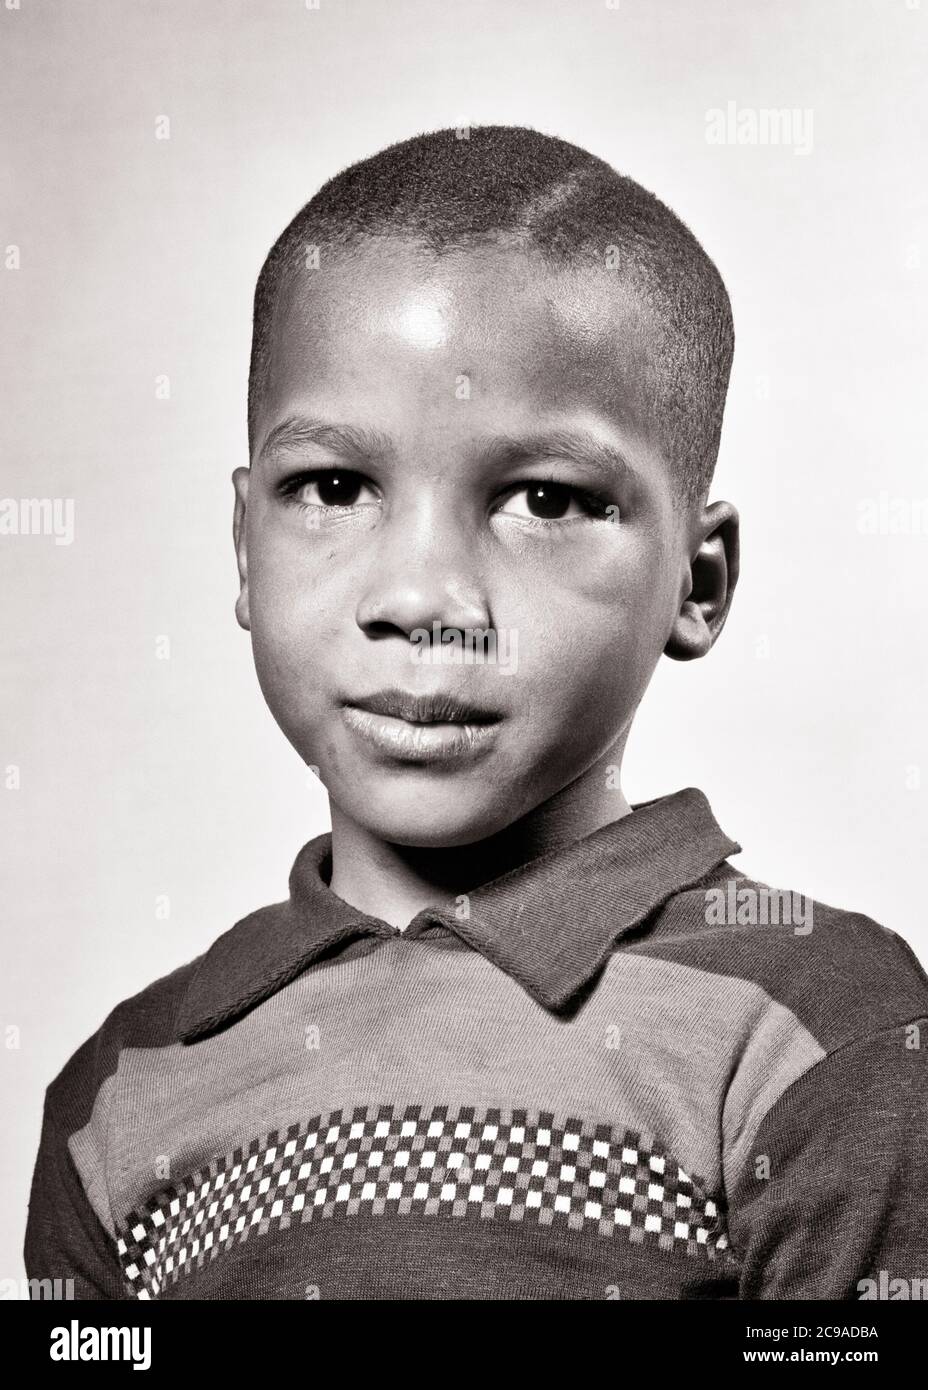 1940s PORTRAIT AFRICAN-AMERICAN BOY LOOKING AT CAMERA SERIOUS FACIAL EX[RESSION - n670 HAR001 HARS HEALTHINESS HOME LIFE COPY SPACE THOUGHTFUL MALES RISK SPIRITUALITY CONFIDENCE EXPRESSIONS TROUBLED B&W CONCERNED SADNESS EYE CONTACT DREAMS WELLNESS HEAD AND SHOULDERS AFRICAN-AMERICANS AFRICAN-AMERICAN BLACK ETHNICITY DIRECTION PRIDE OPPORTUNITY MOOD CONCEPTUAL GLUM SINCERE SOLEMN FOCUSED GROWTH INTENSE JUVENILES MISERABLE BLACK AND WHITE CAREFUL EARNEST HAR001 INTENT OLD FASHIONED AFRICAN AMERICANS Stock Photo